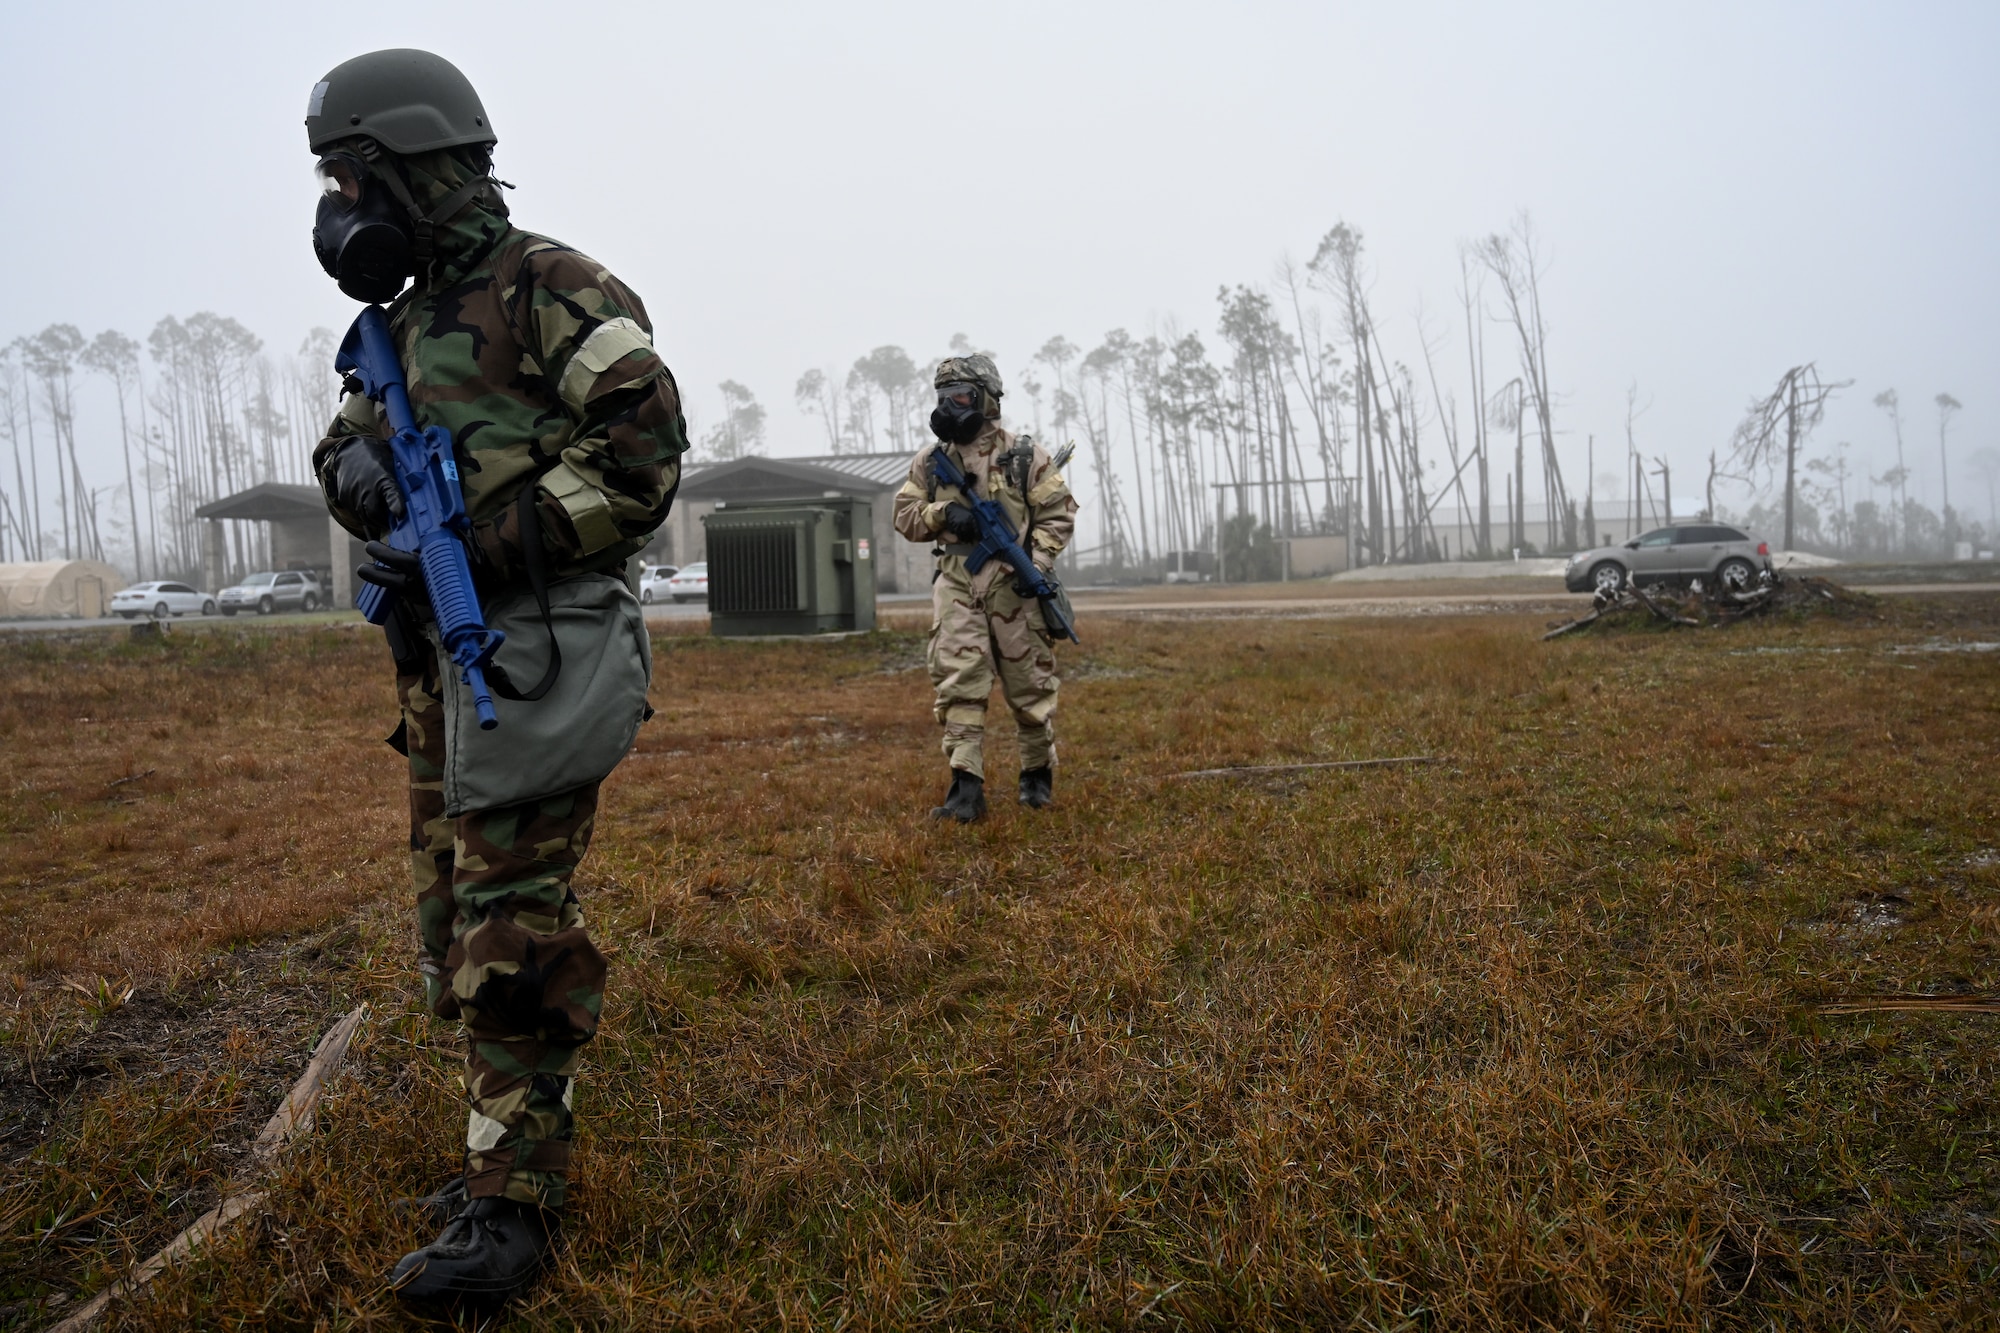 Airmen in chemical warfare gear patrolling with rifles.